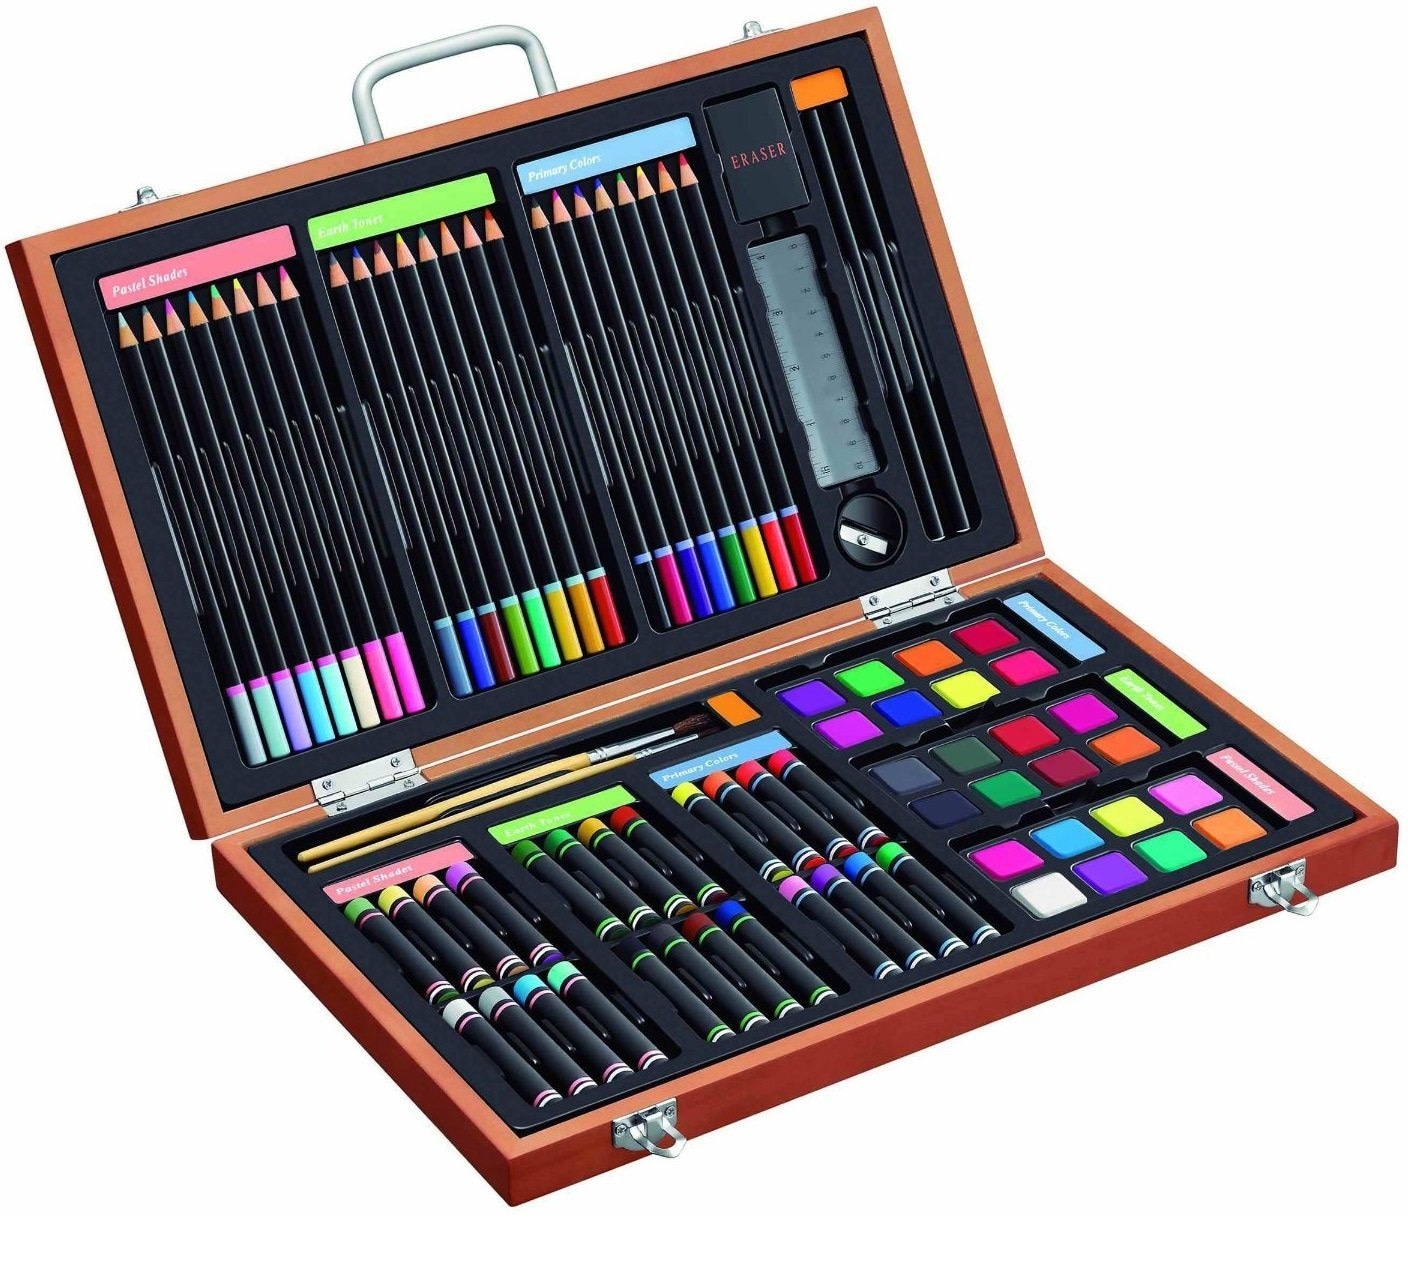 Deluxe Wood Case With Drawer and 142 Piece Art Supplies, for